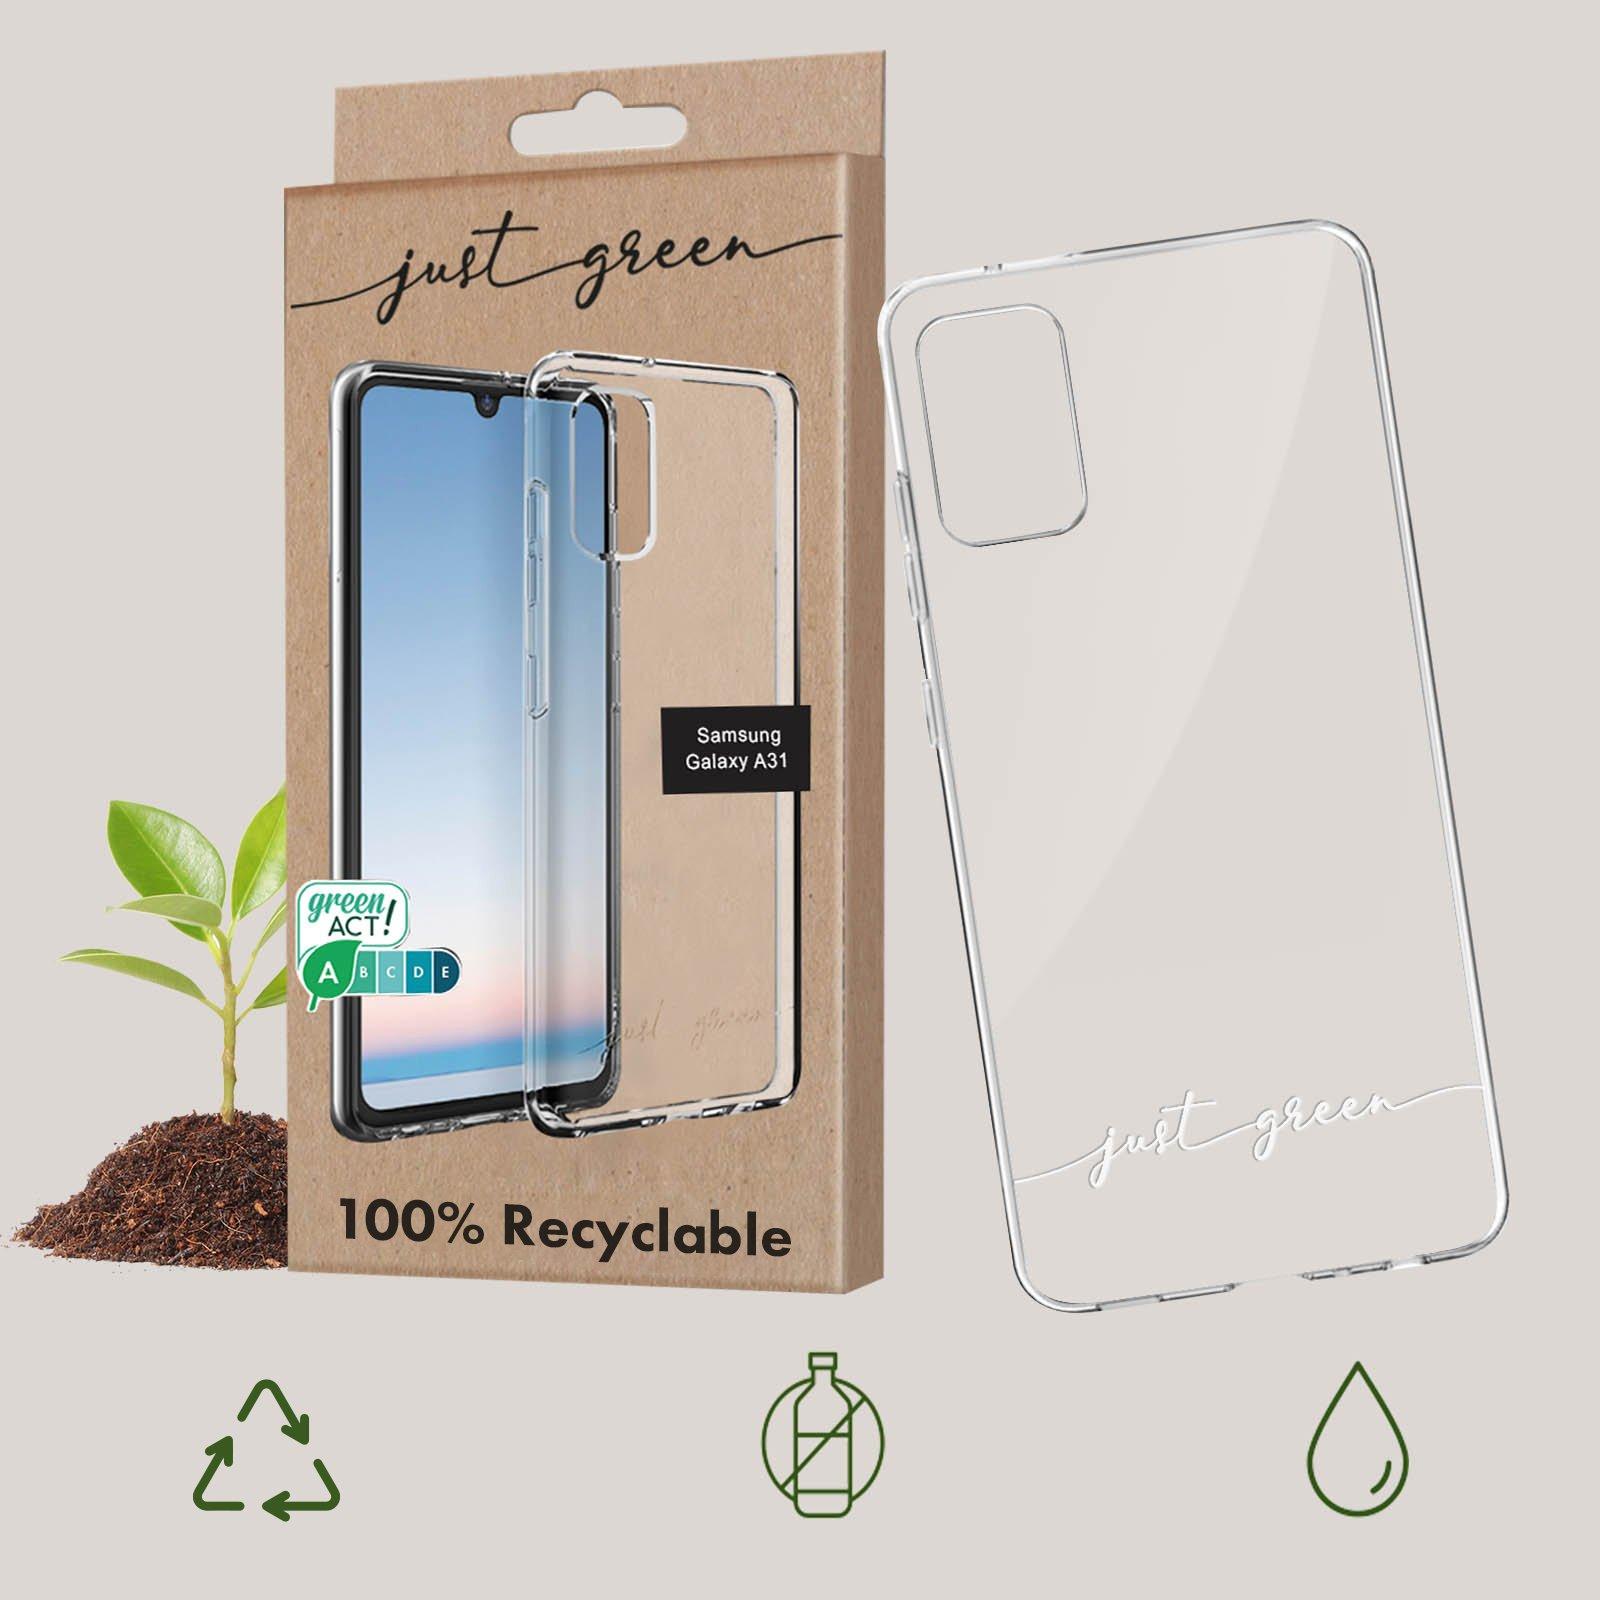 Just green  Coque Samsung Galaxy A31 Recyclable 